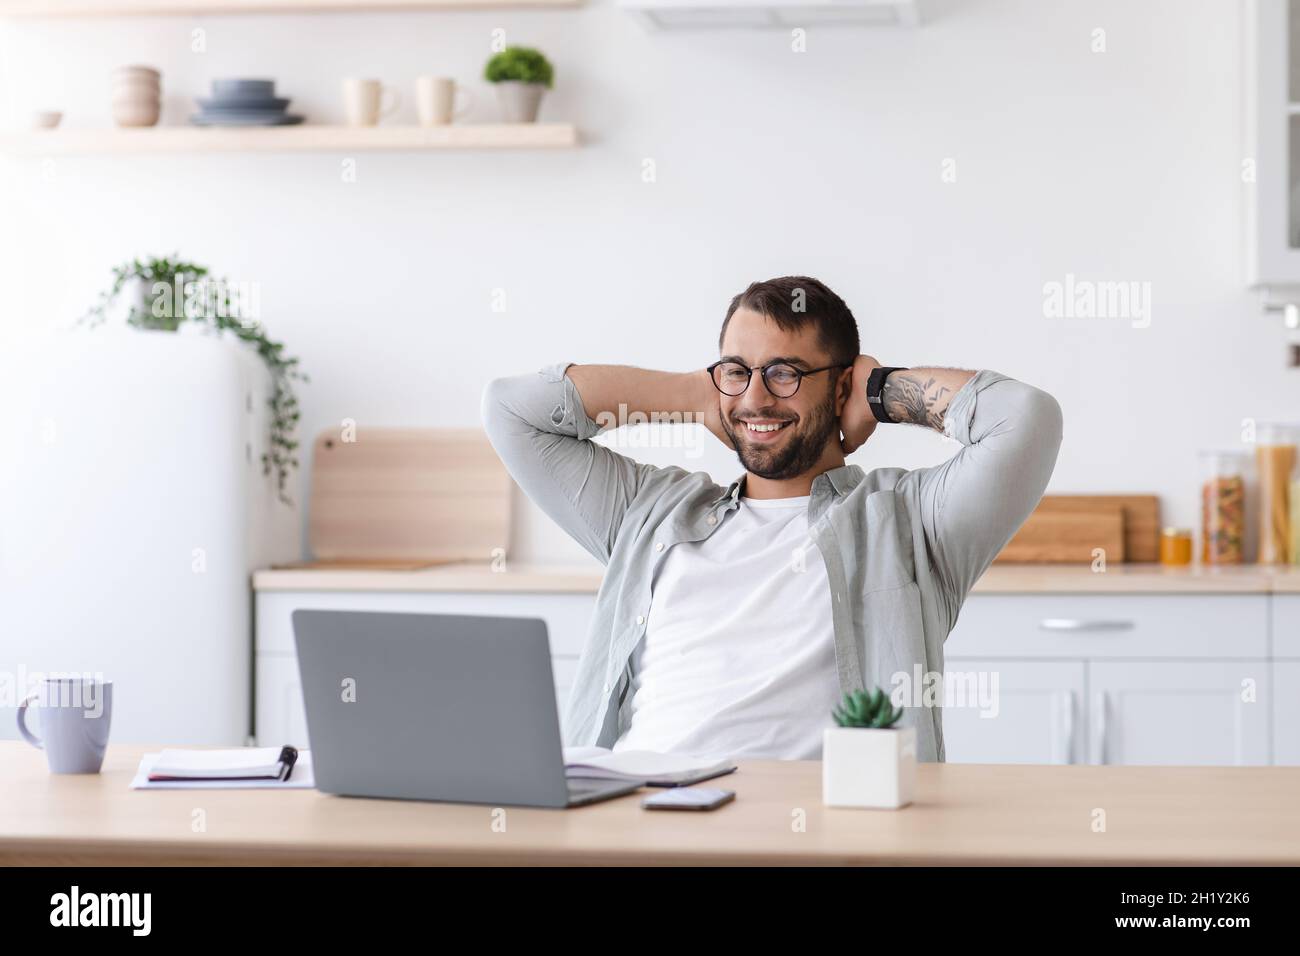 Glad adult caucasian businessman with beard in glasses rest while working at laptop on minimalist kitchen interior Stock Photo